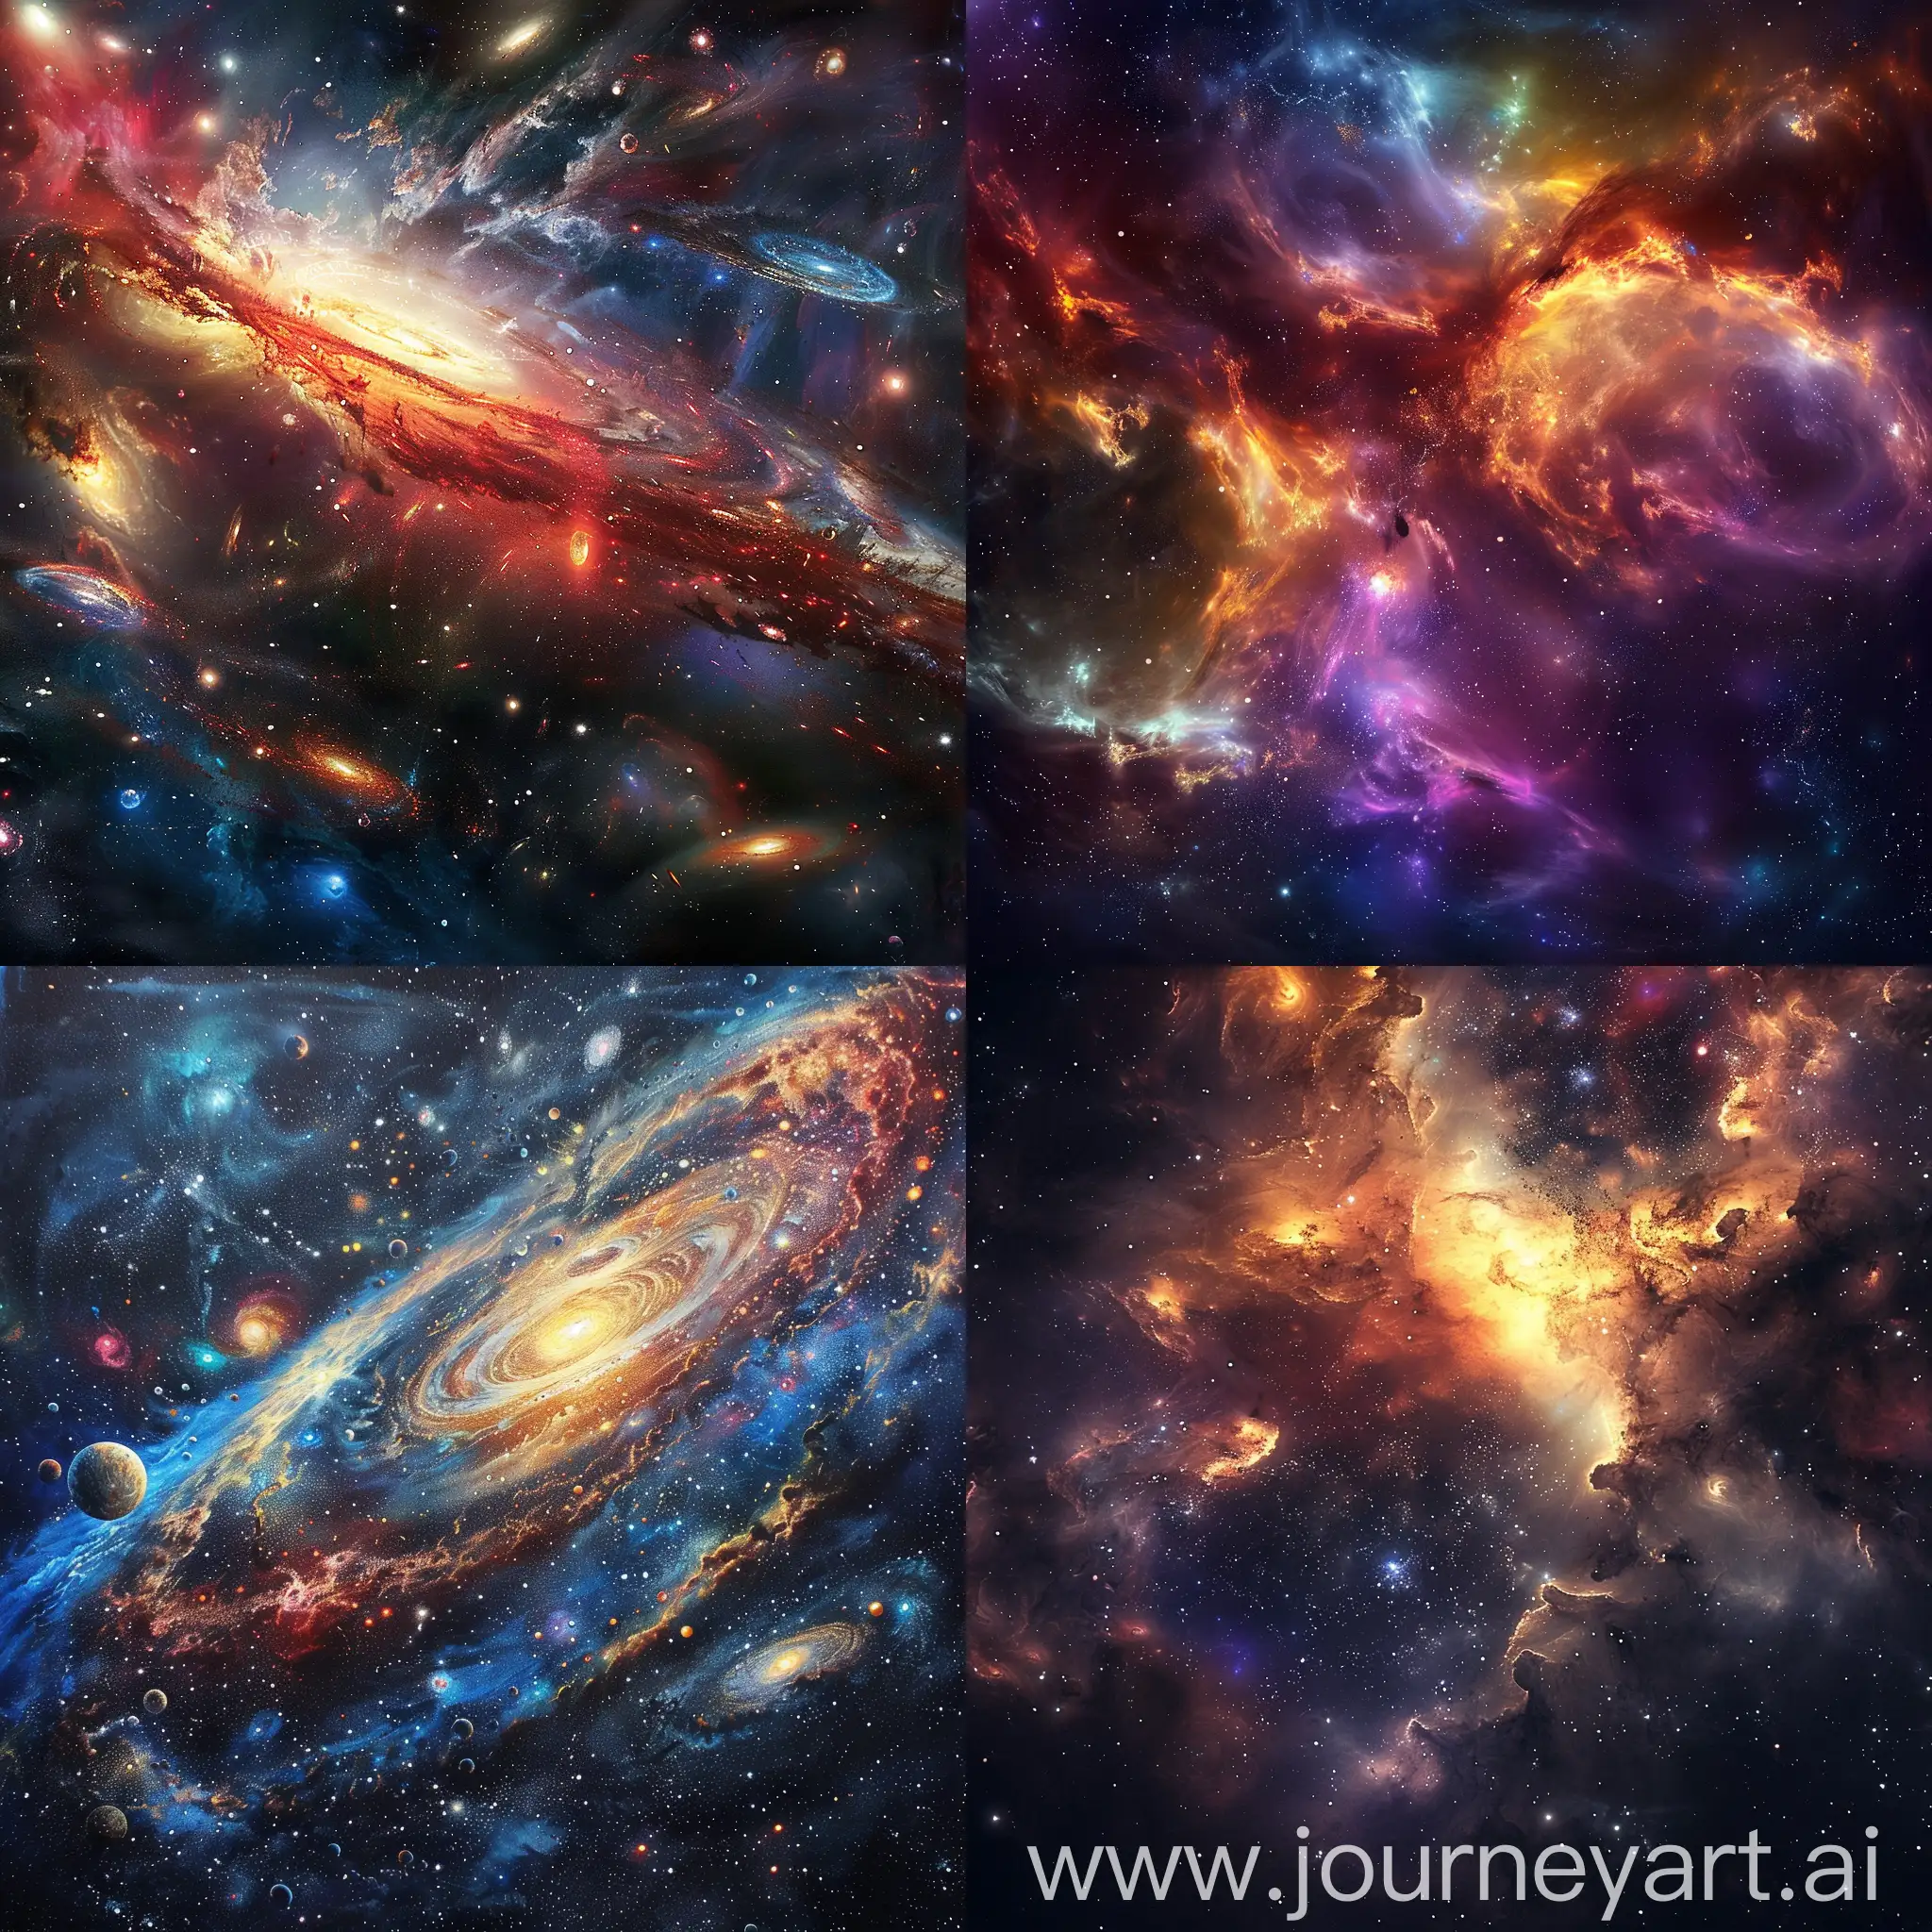 Vibrant-Cosmos-Exploration-Discovering-the-Unknown-Wonders-of-the-Universe